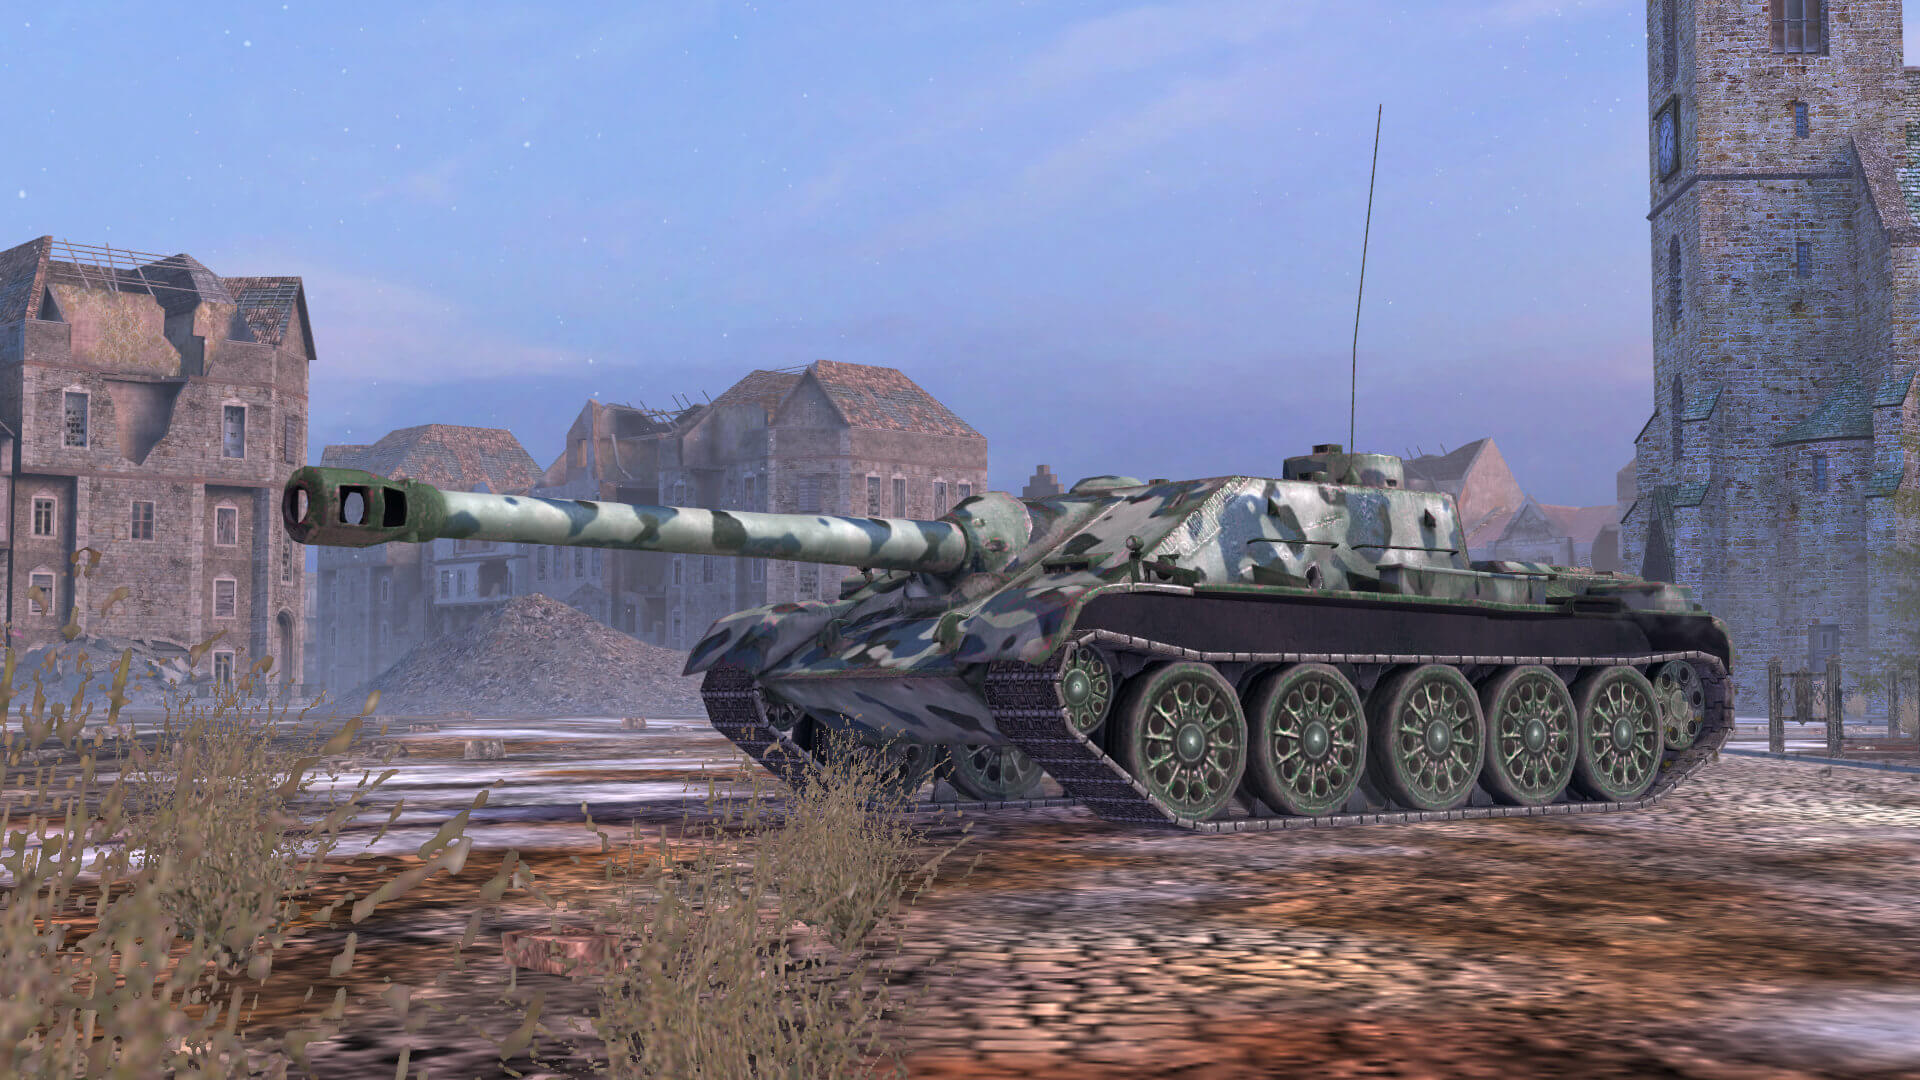 Apr 11 19 Sentinel Challenge World Of Tanks Blitz Tog Ii The Watchful Ac Iv Sentinel This Striking Tier Vi Soldier Is Ready To Follow Your Orders The Tank Doesn T Boast Sturdy Armor But It Features Great Mobility And Rate Of Fire It Is Most Effective When